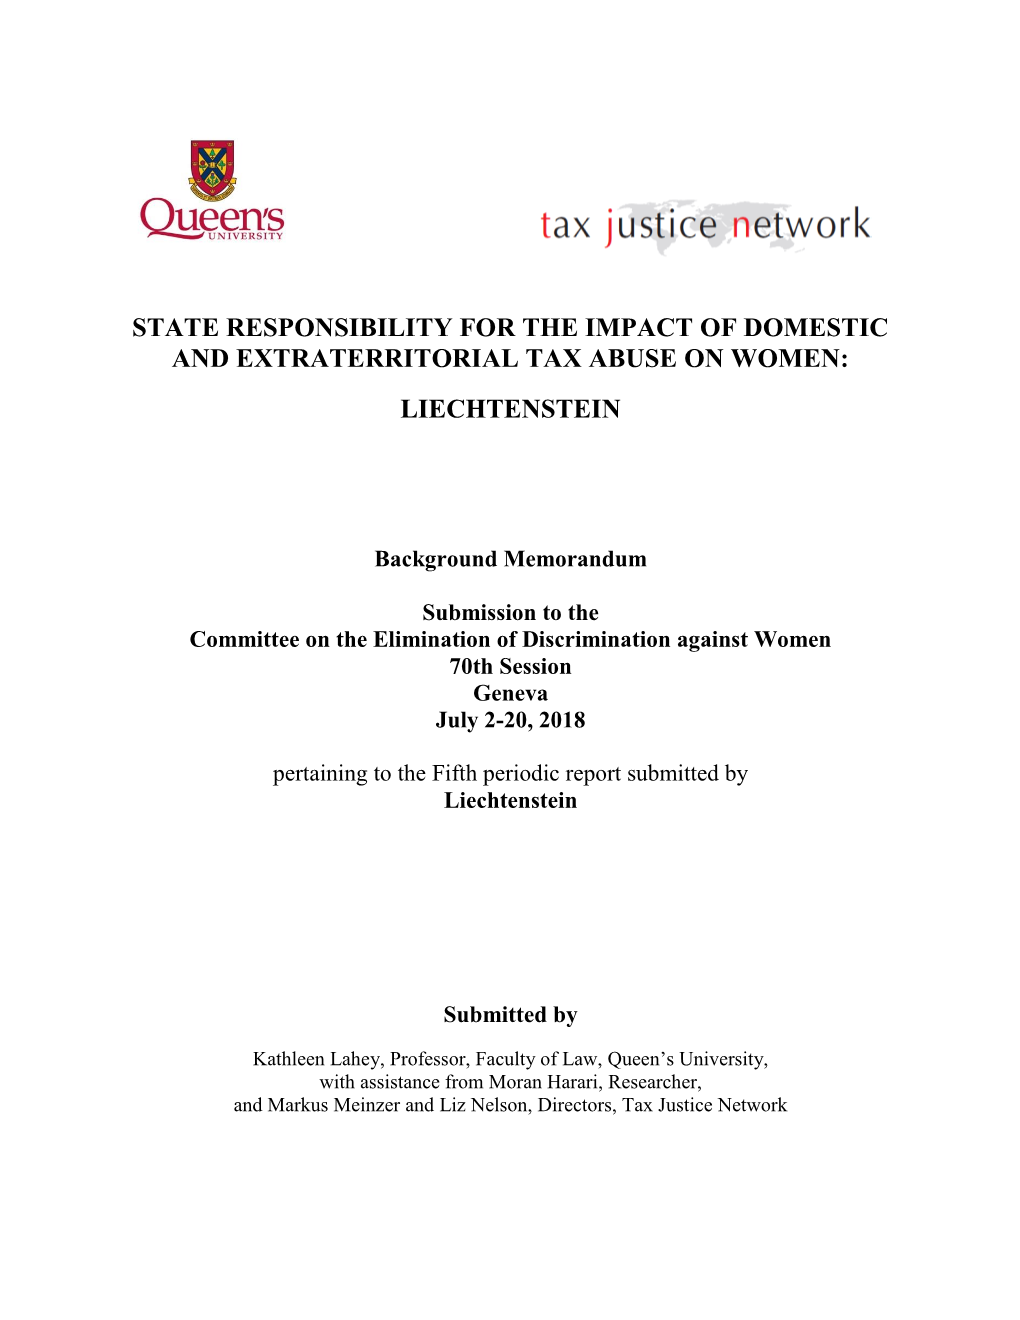 State Responsibility for the Impact of Domestic and Extraterritorial Tax Abuse on Women: Liechtenstein